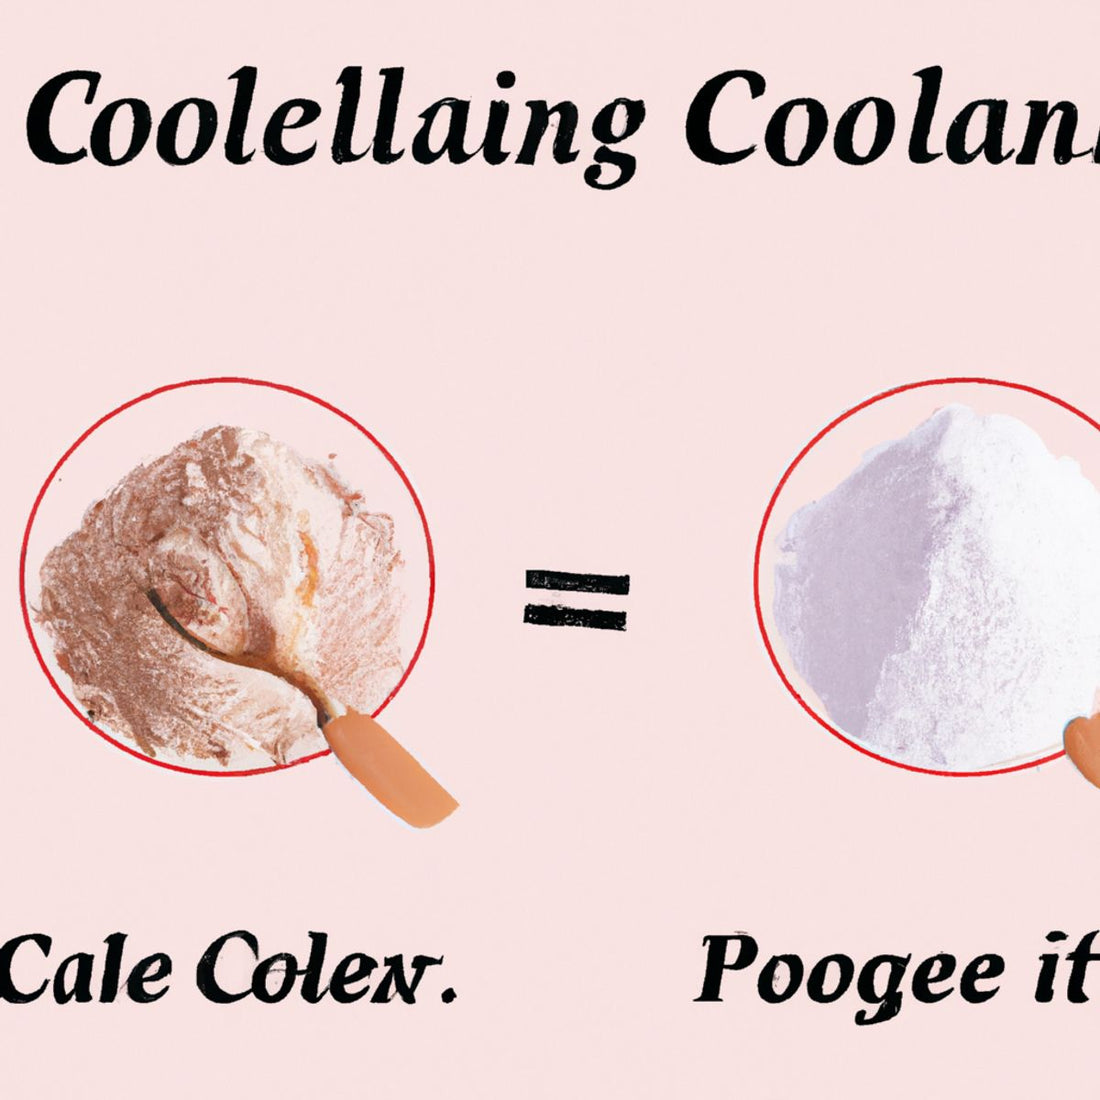 How Collagen Powder Can Improve Your Body Image: A Look at the Connection